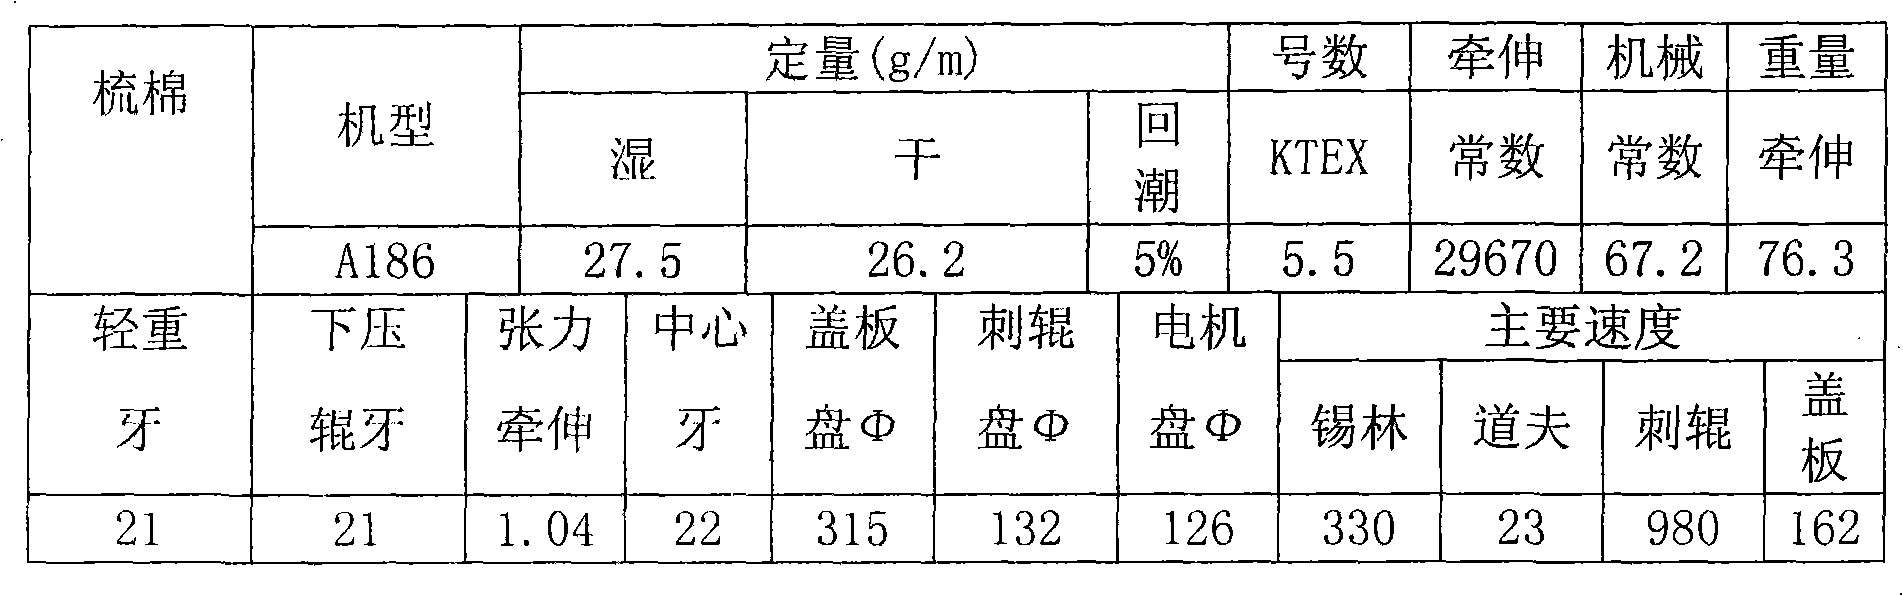 Production method of jhouta and dacron blended yarn